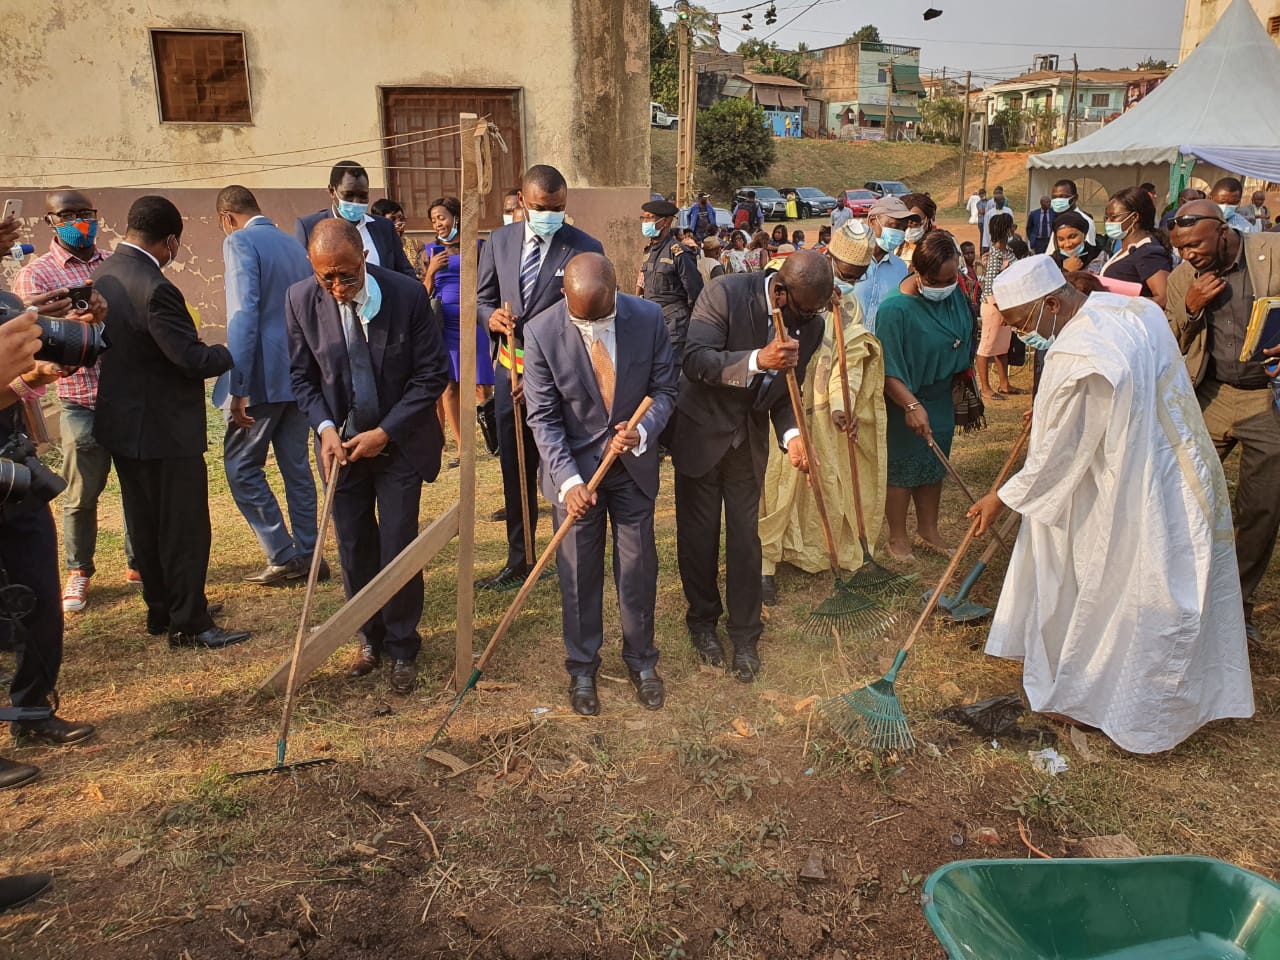 UN-Habitat Deputy Executive Director Victor Kisob launches a clean up exercise at Cité Verte, Yaoundé during his two day visit in February 2021